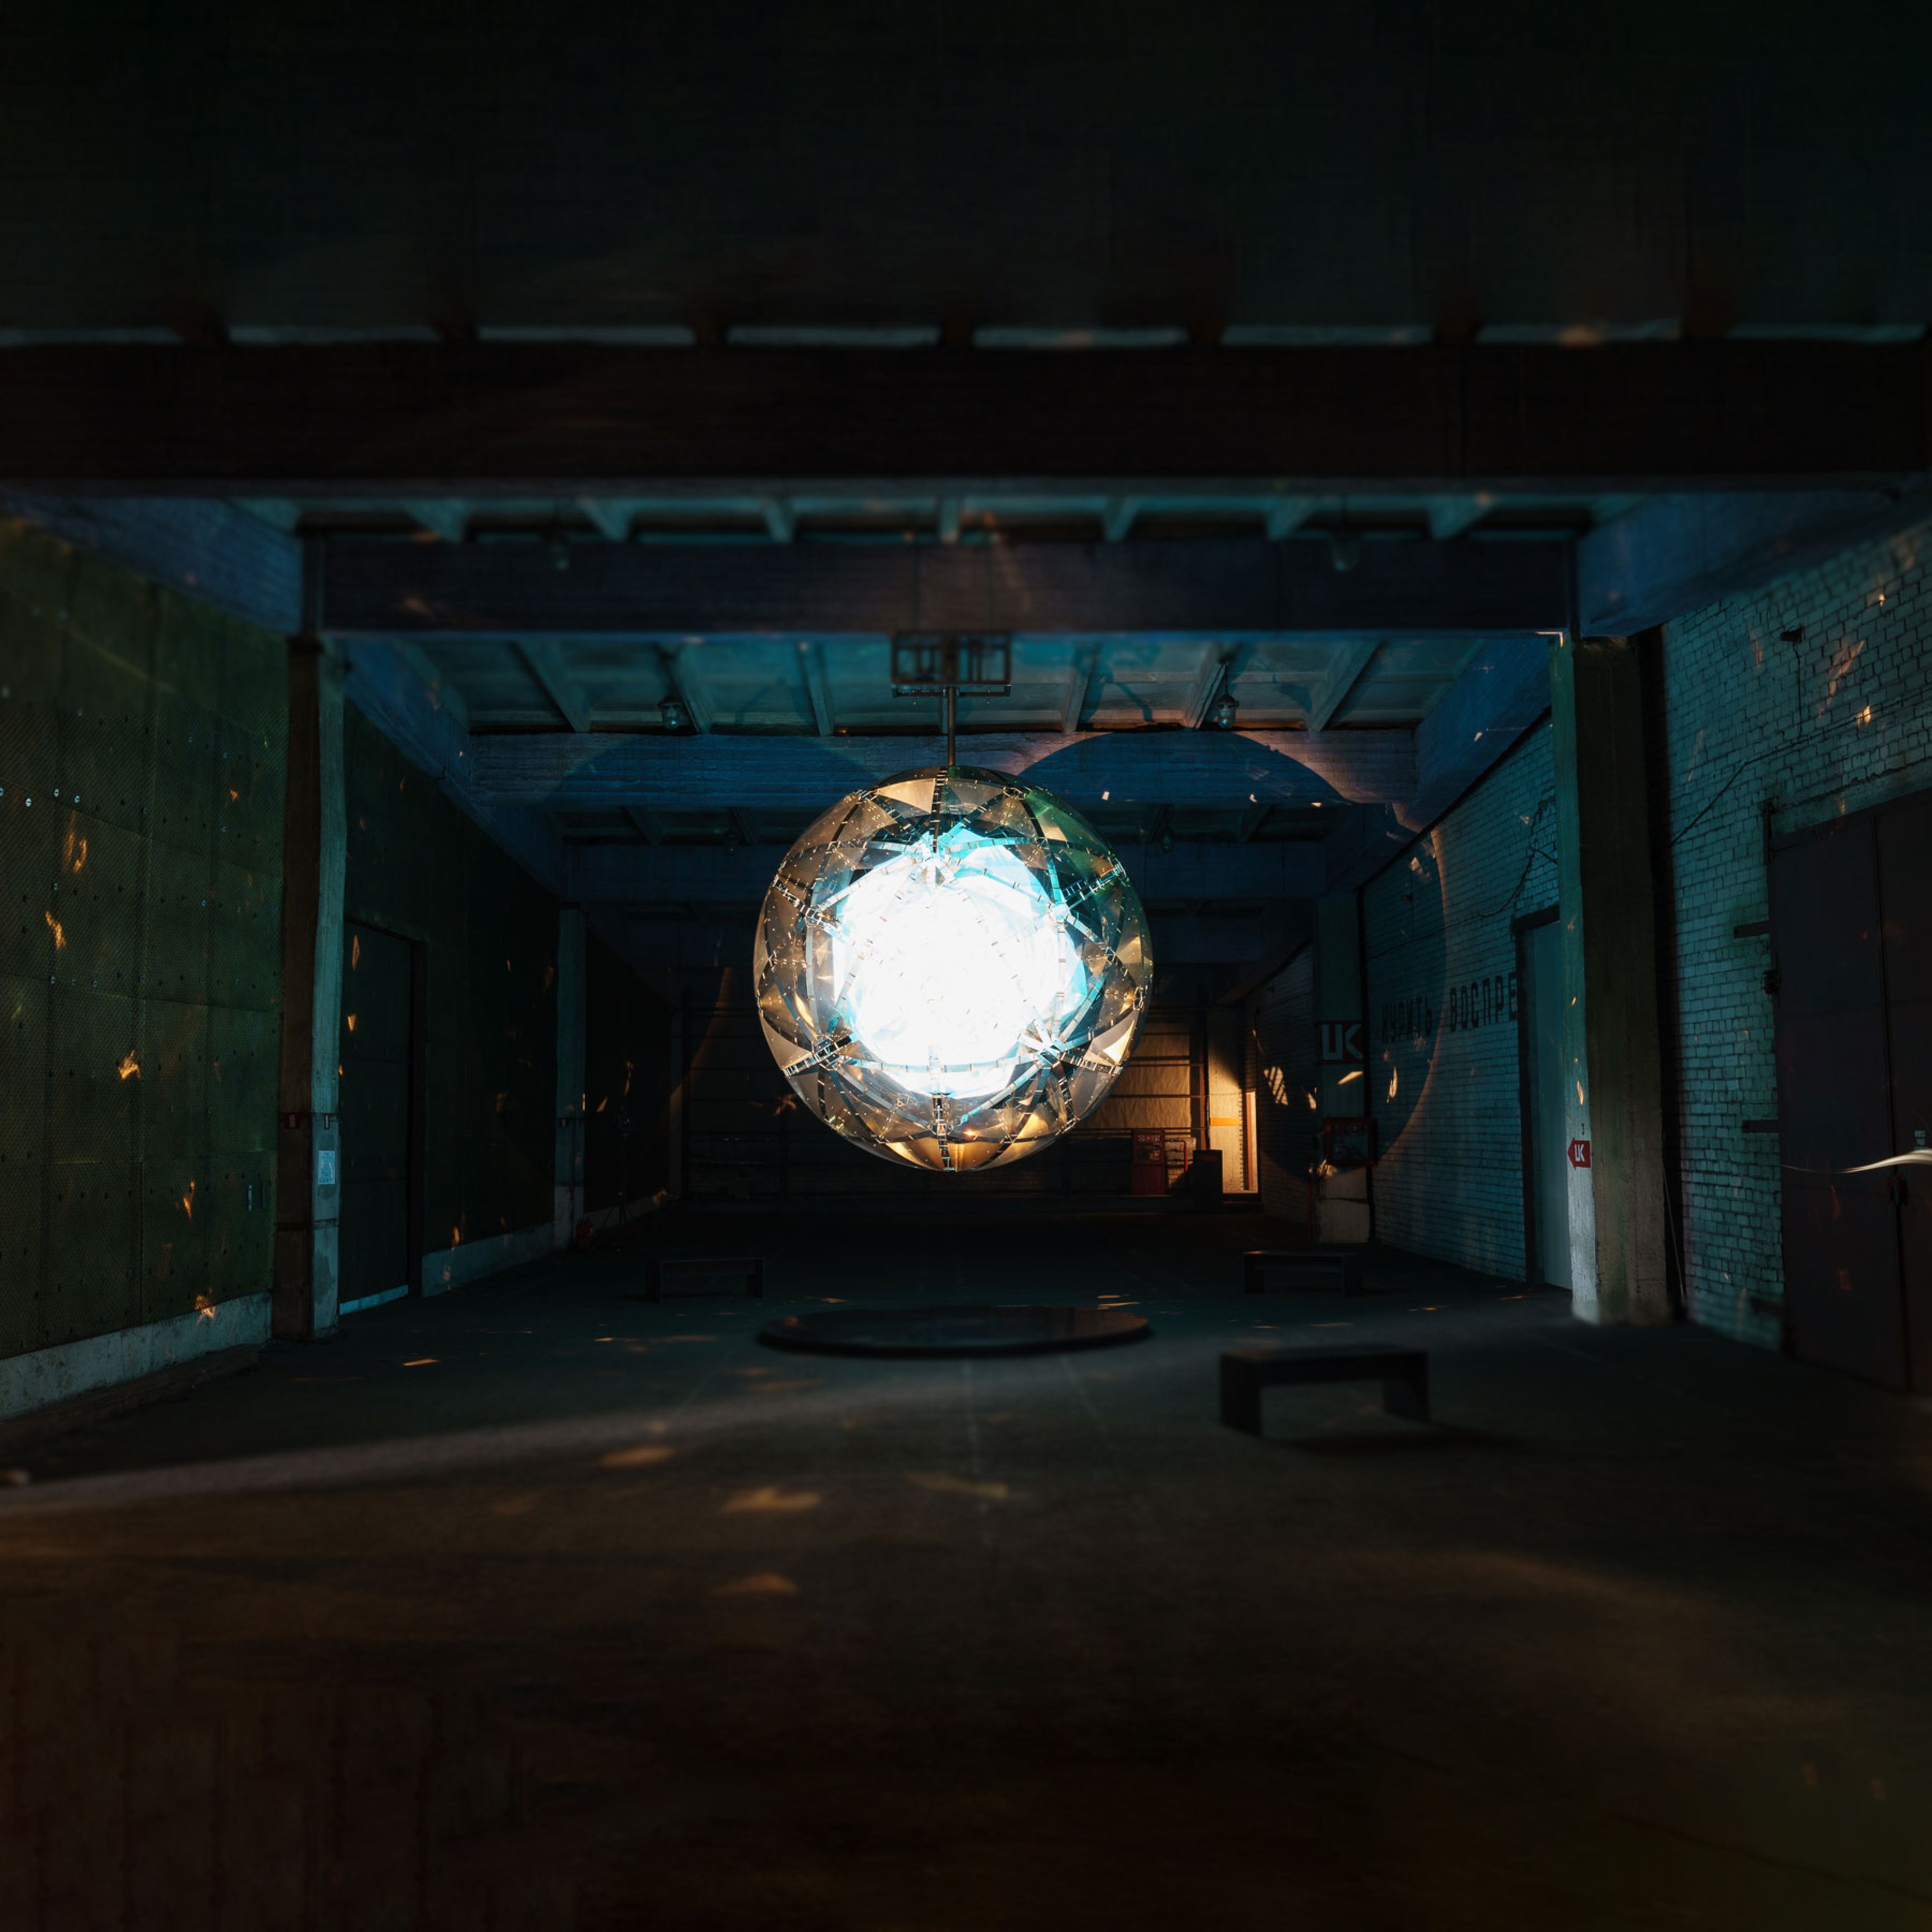 A gigantic glowing crystal suspended from the ceiling of a dark concrete room.